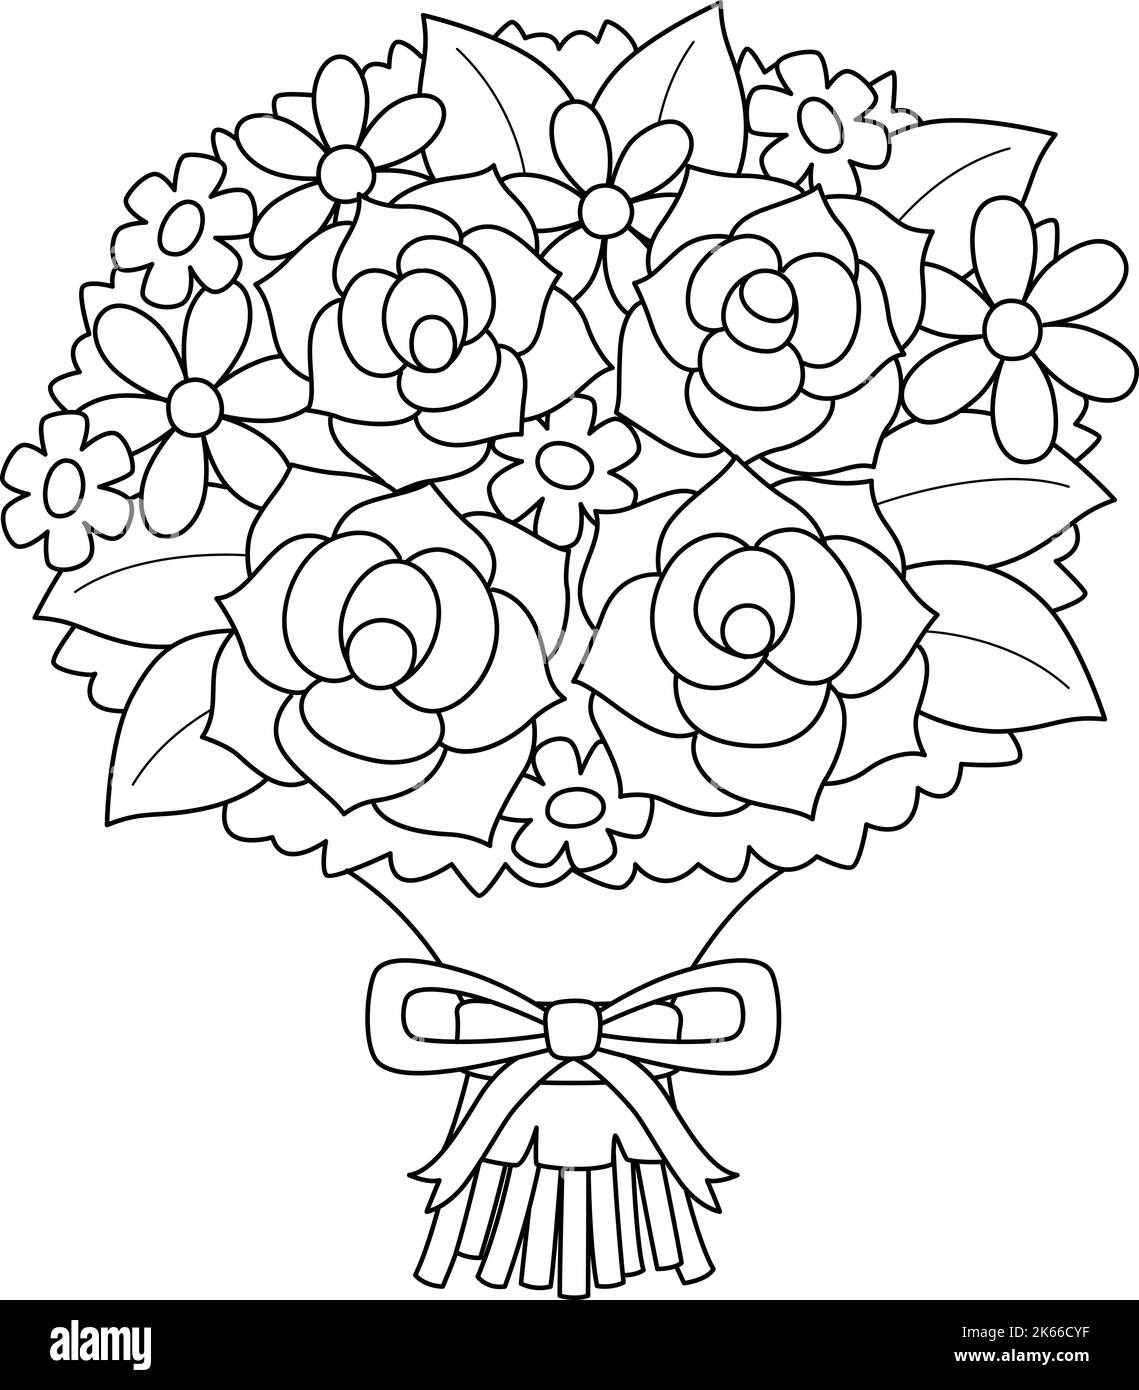 Wedding Flower Bouquet Isolated Coloring Page  Stock Vector